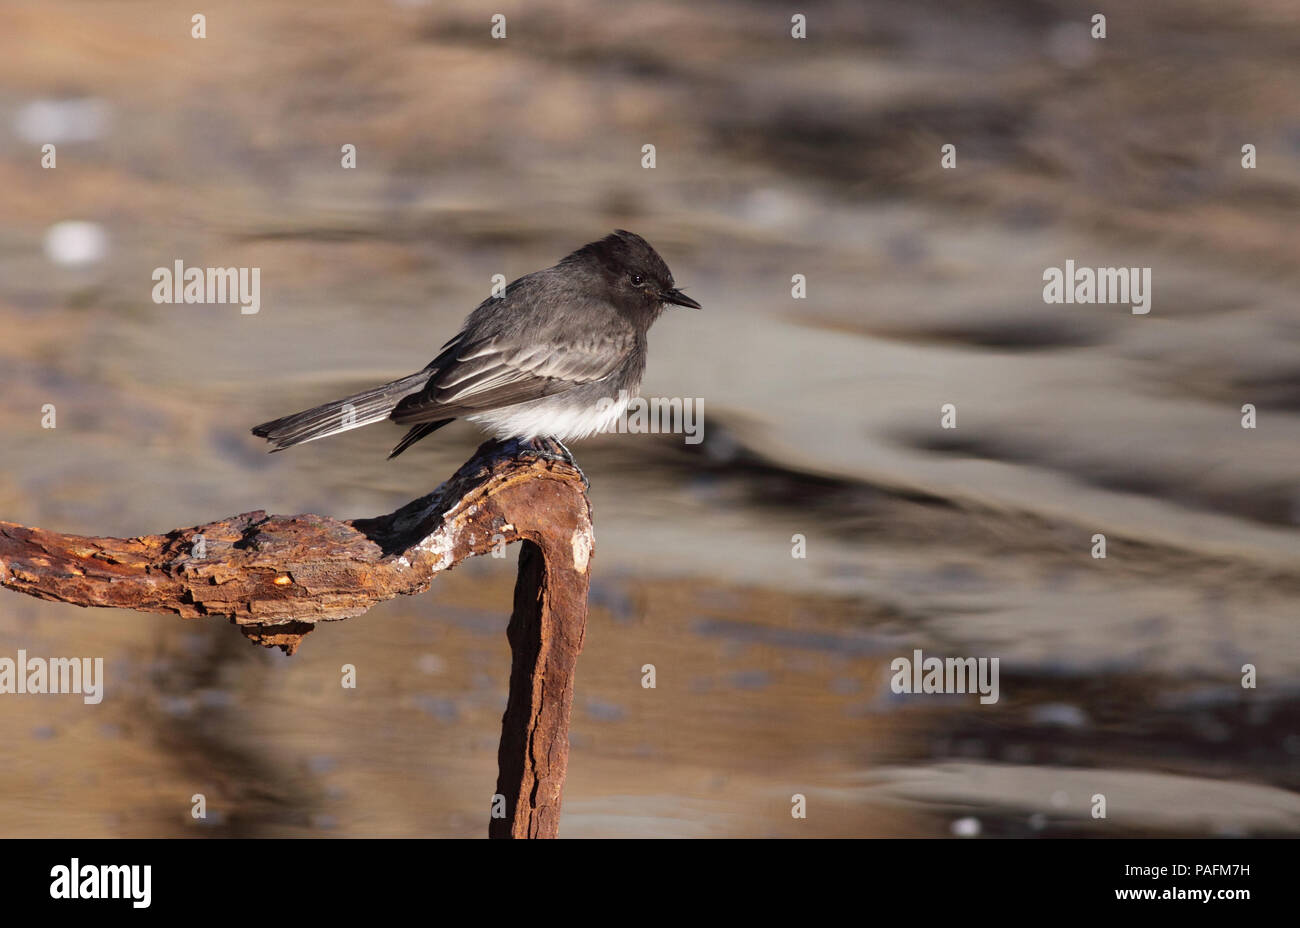 Black Phoebe December 18th, 2008 Land's End in San Francisco, California Canon 50D, 400 5.6L Stock Photo